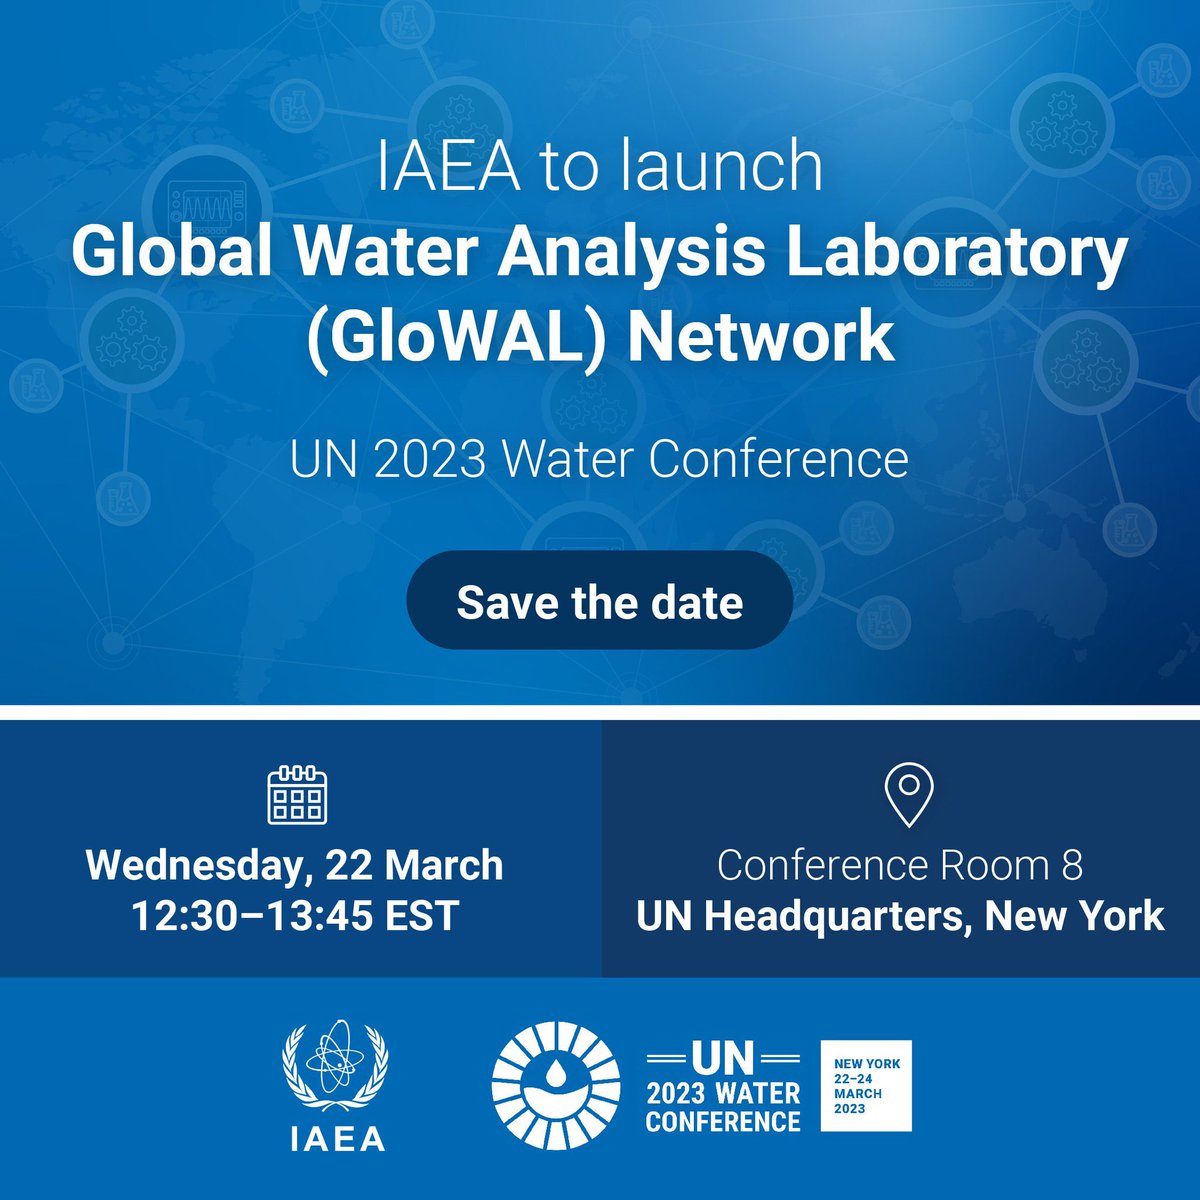 Starting in 2 hours! With @elictevout1.

📢#WaterAction @ #UN2023WaterConference on #WorldWaterDay💧

🎥Join #live launch of @IAEAorg Global Water Analysis Laboratory #GloWAL Network: bit.ly/404UTkn

🗓️TODAY🕧12:30 EST
 @GlobalGoalsUN @UN_Water #Goal6 #Atoms4Climate